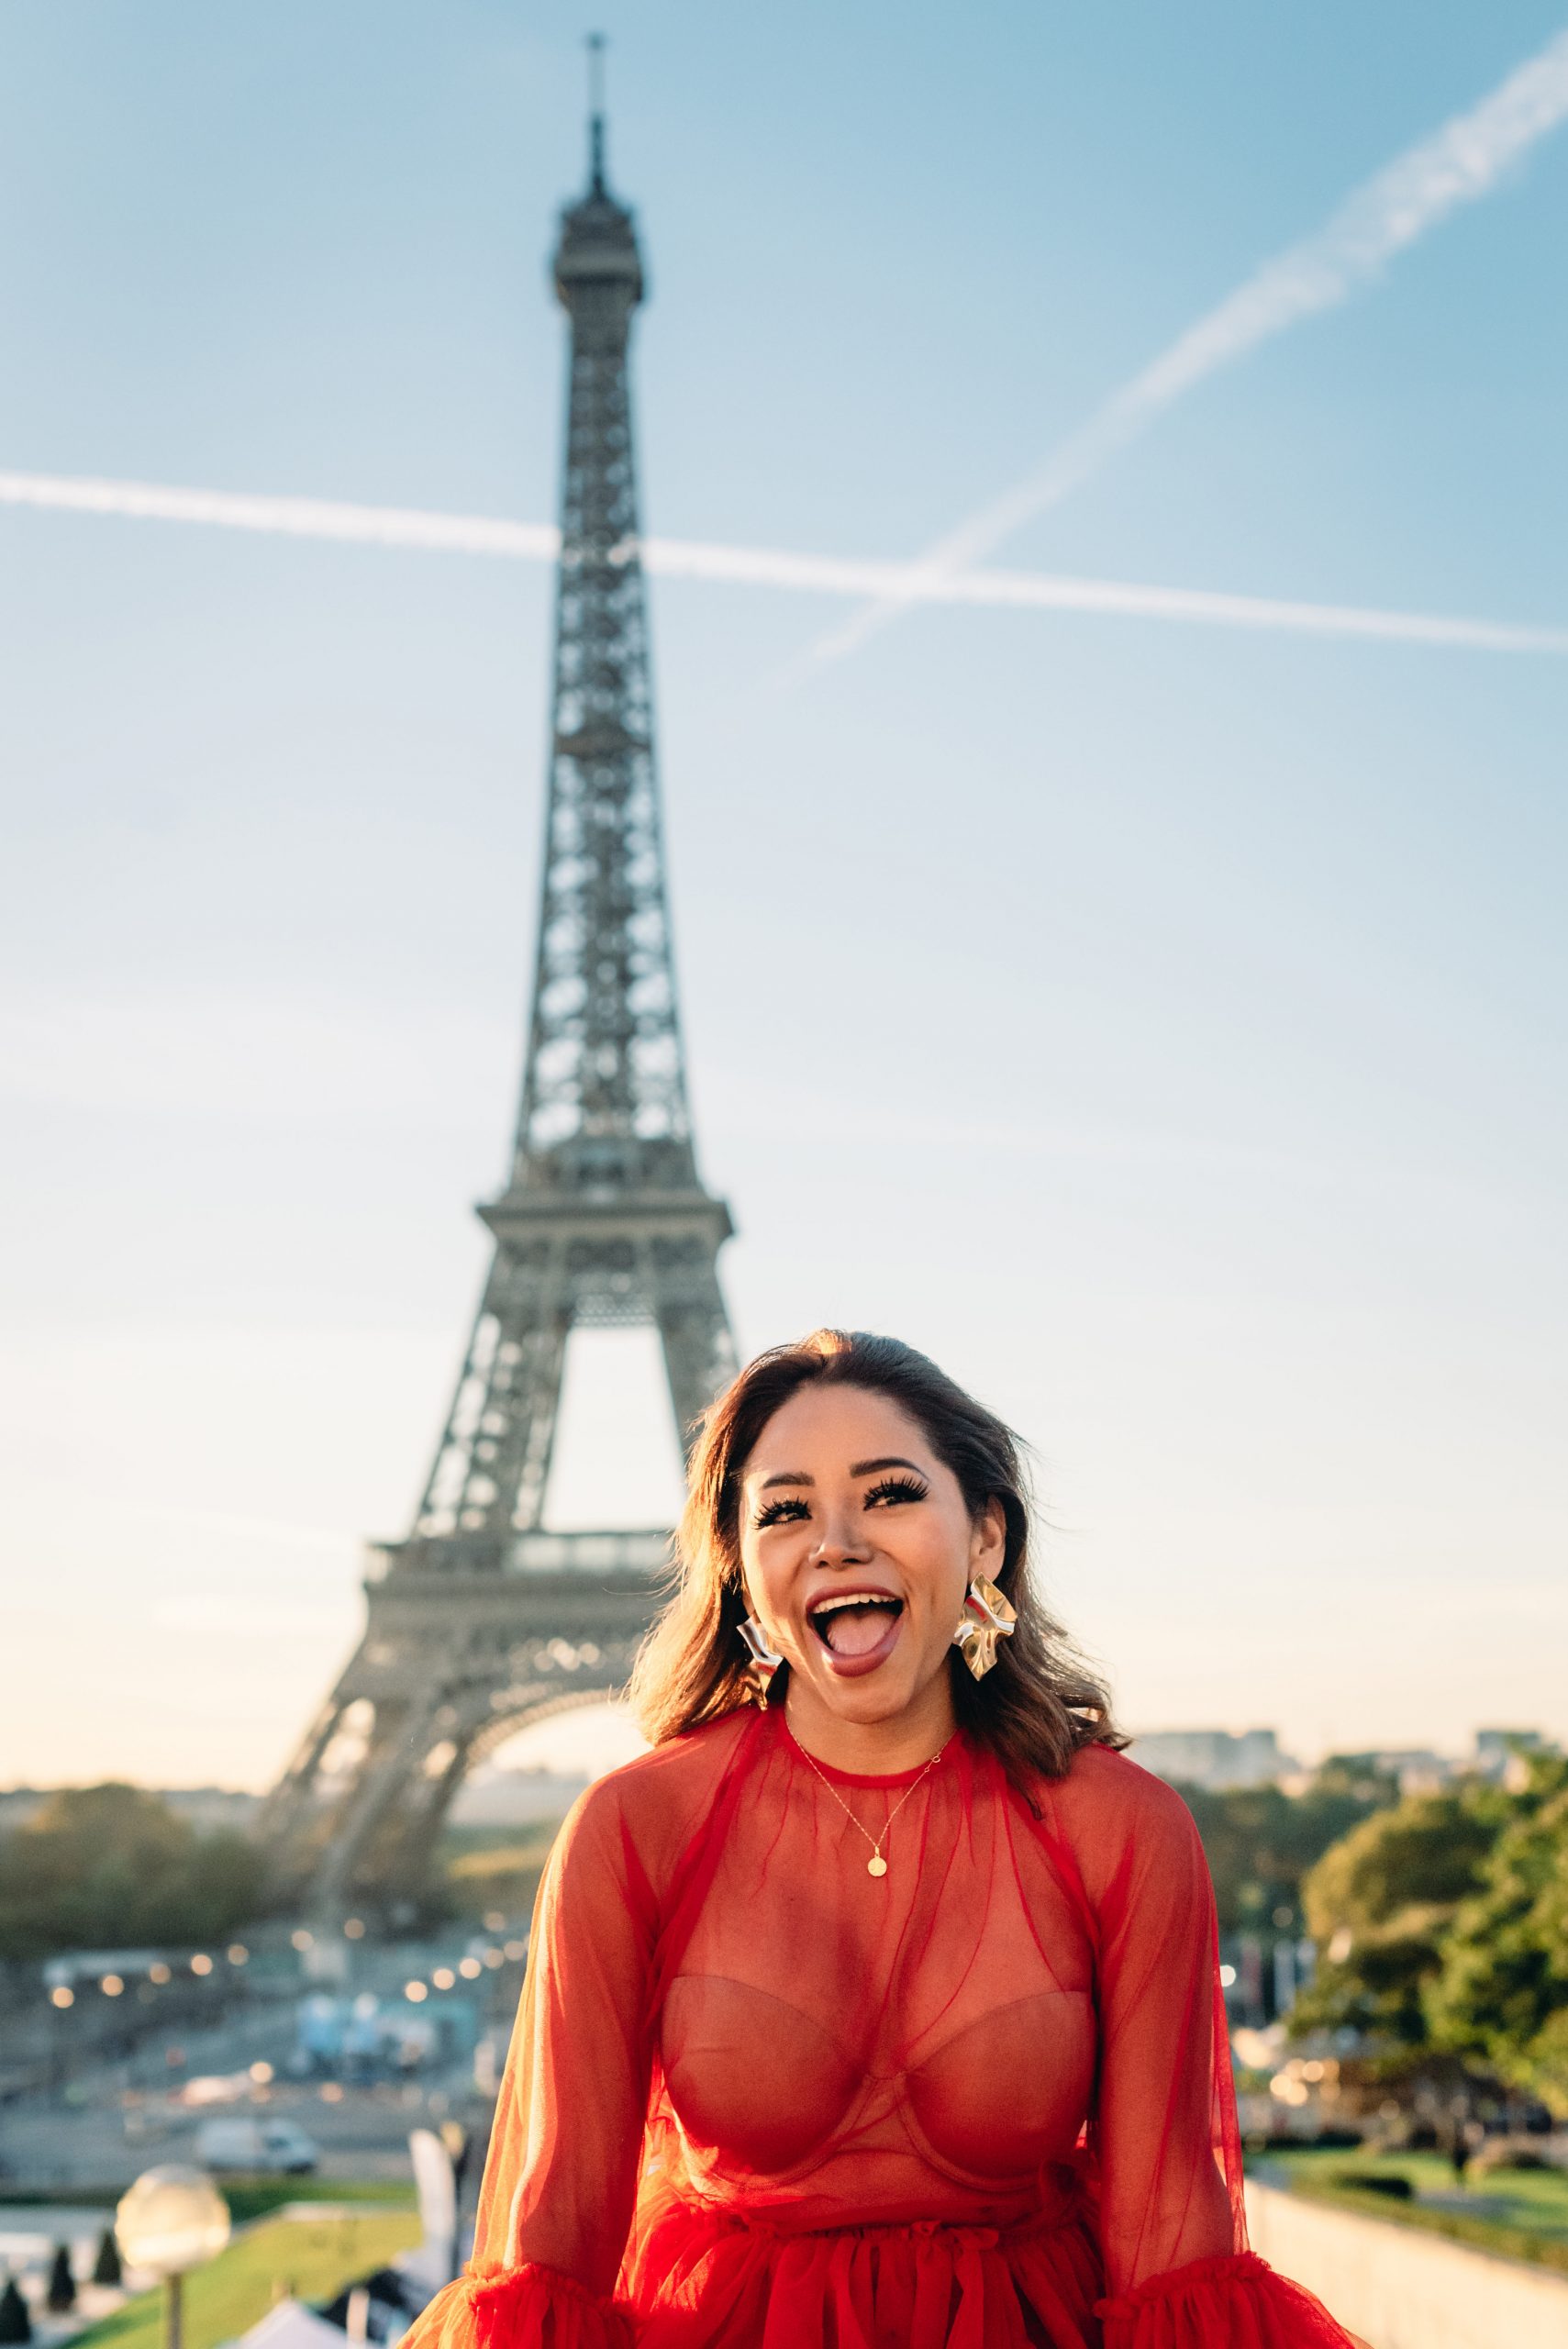 Portrait photography session in front of the Eiffel Tower in Paris, featuring a young woman in a mesh red dress and big gold earrings at sunrise